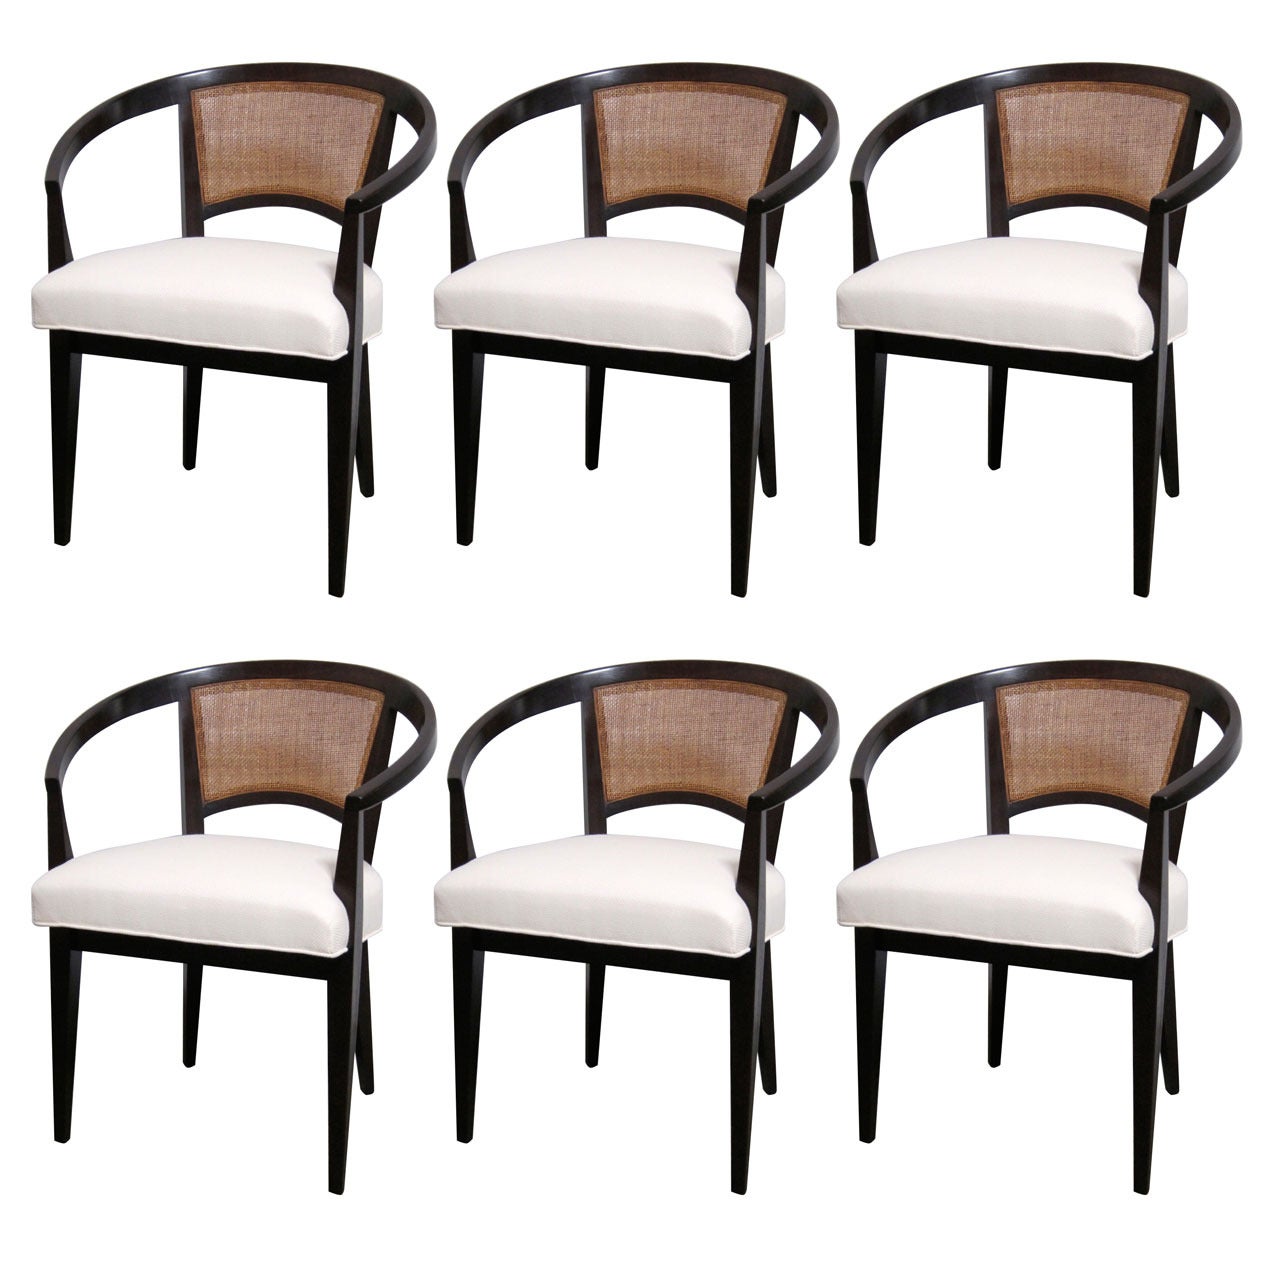 Six Modern Hoop Back Mahogany Dining Chairs by Harvey Probber